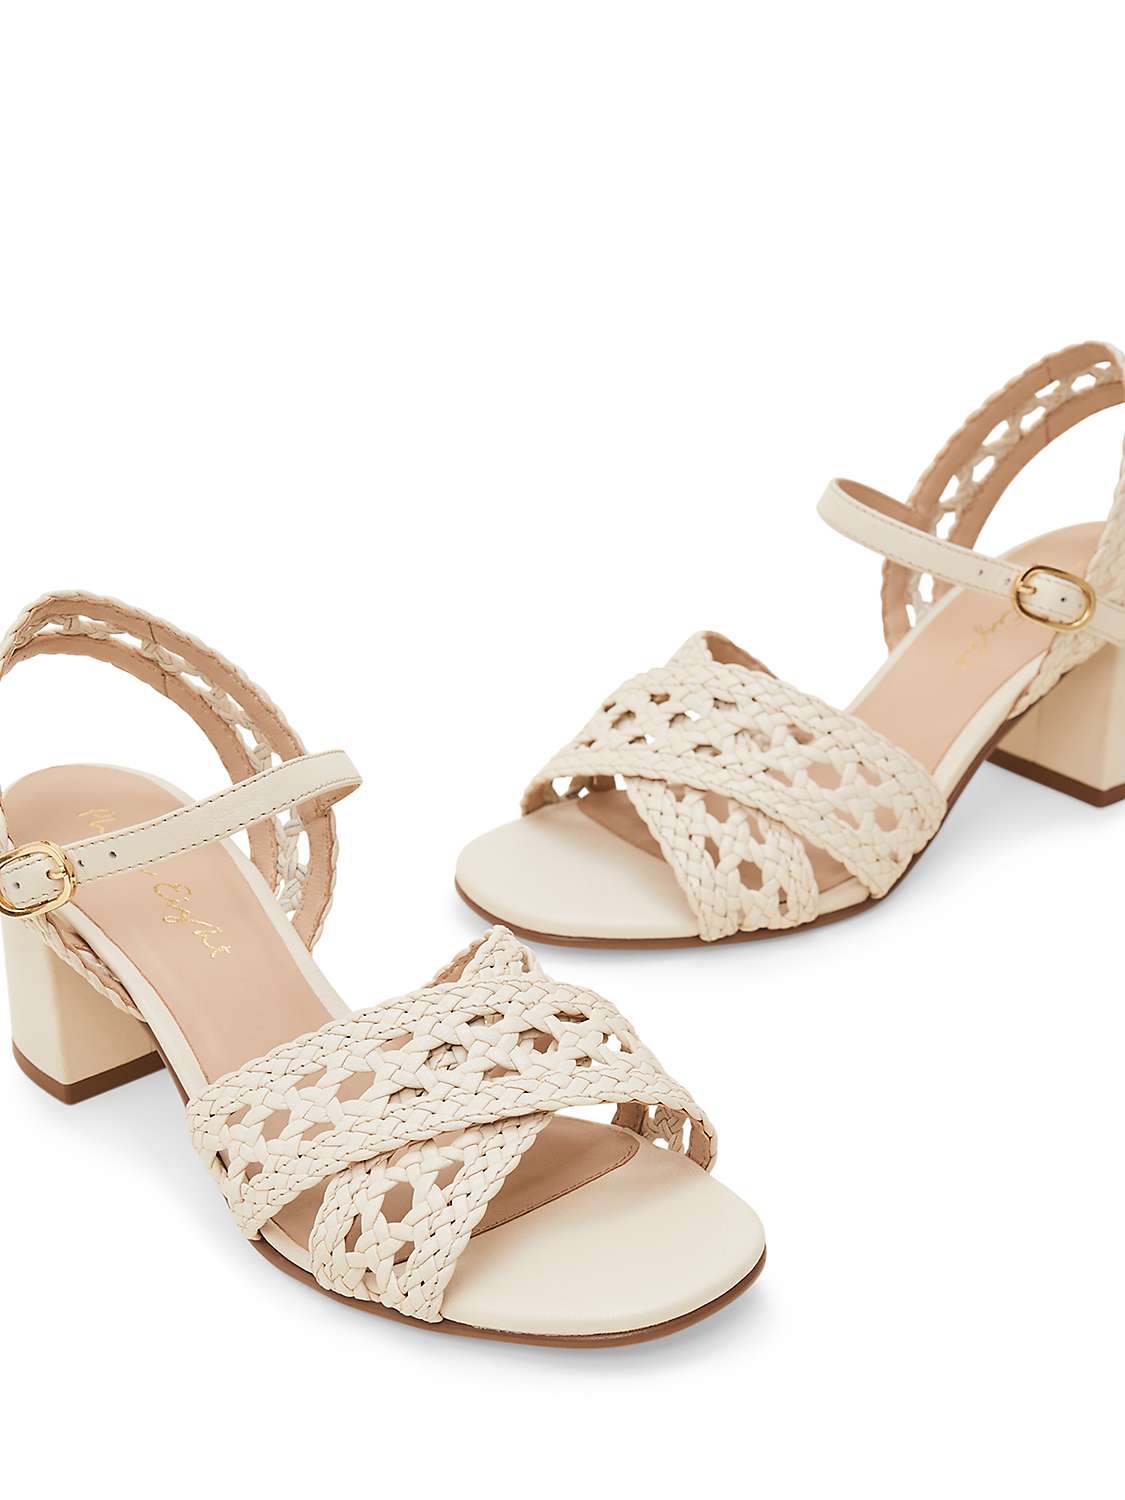 Buy Phase Eight Woven Leather Block Heel Sandals, Cream Online at johnlewis.com